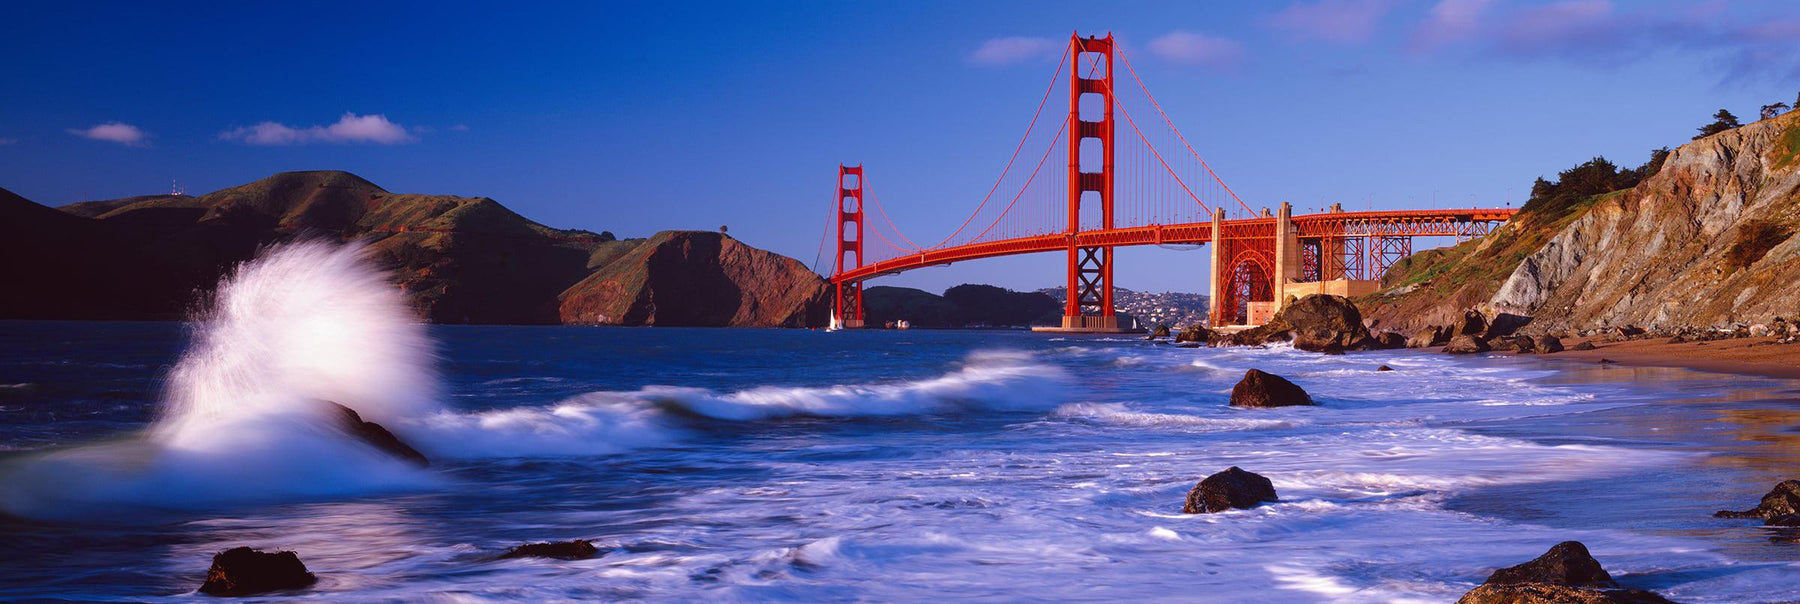 Waves crashing on the rocks of Baker Beach California with the Golden Gate Bridge in the background